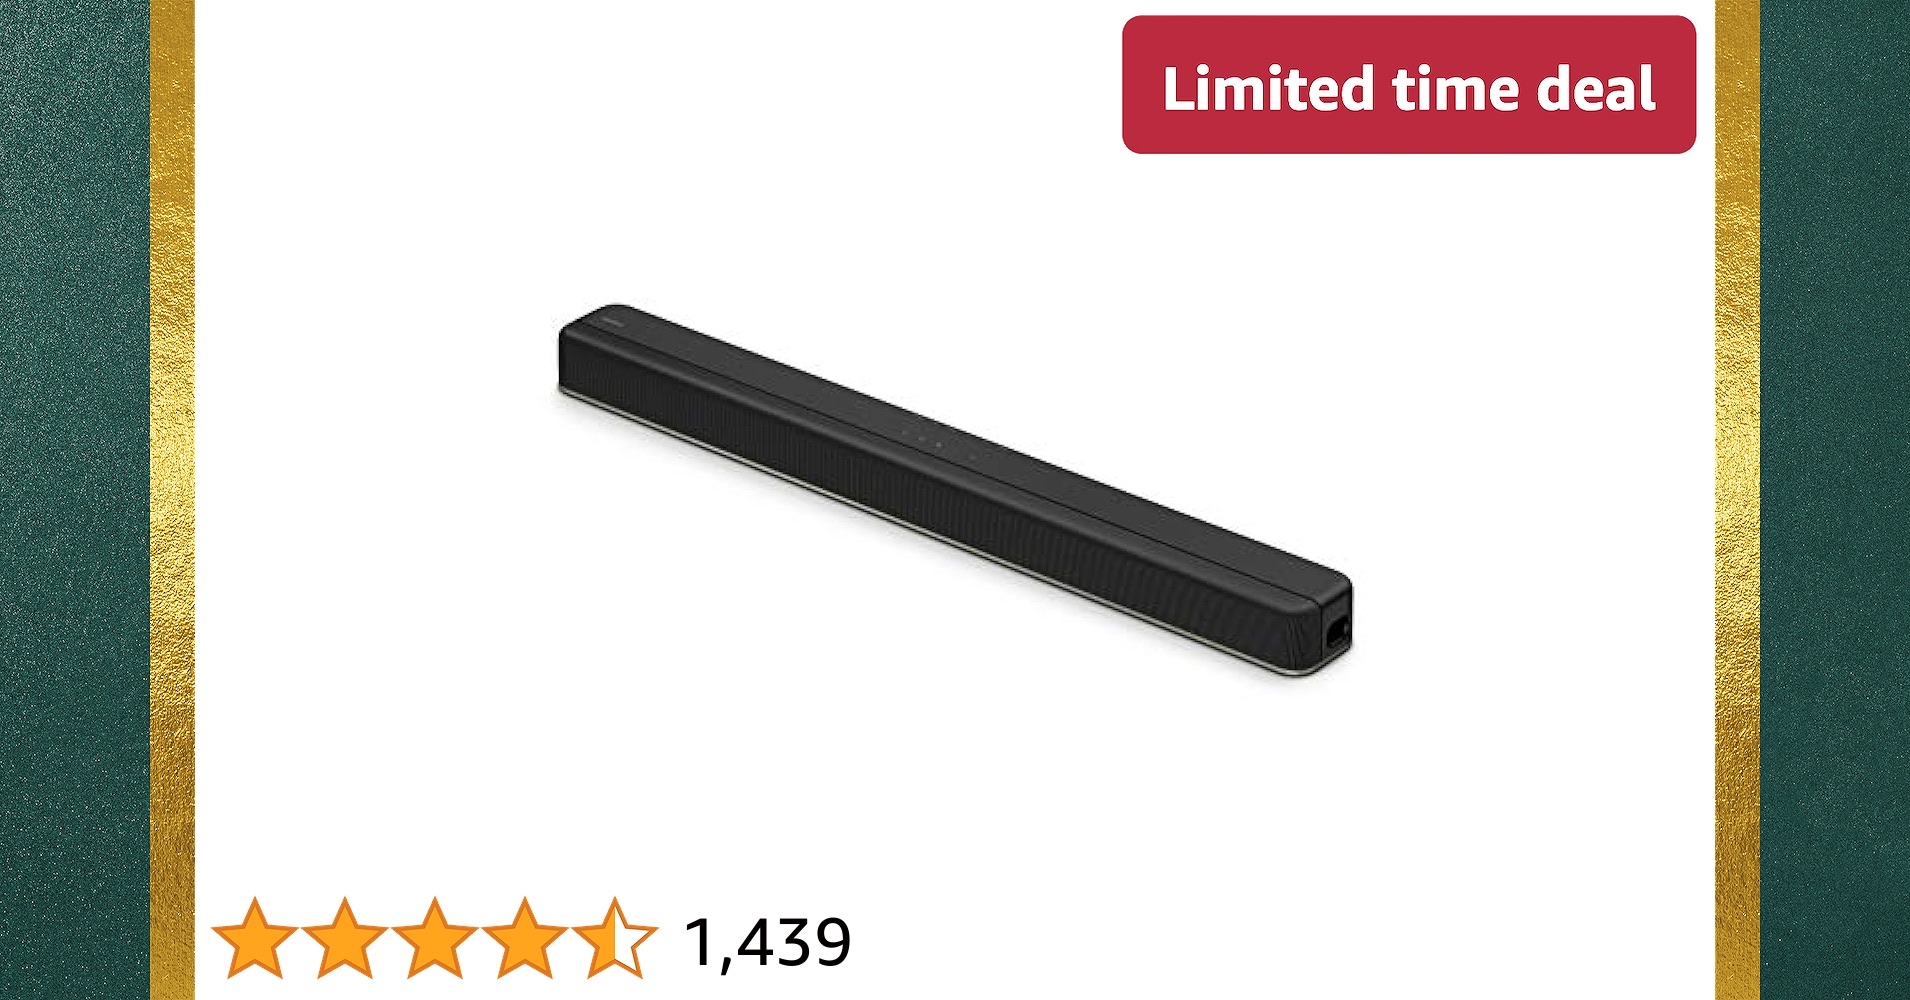 Limited-time deal: Sony HTX8500 2.1ch Dolby Atmos/DTS:X Soundbar with Built-in subwoofer, Black